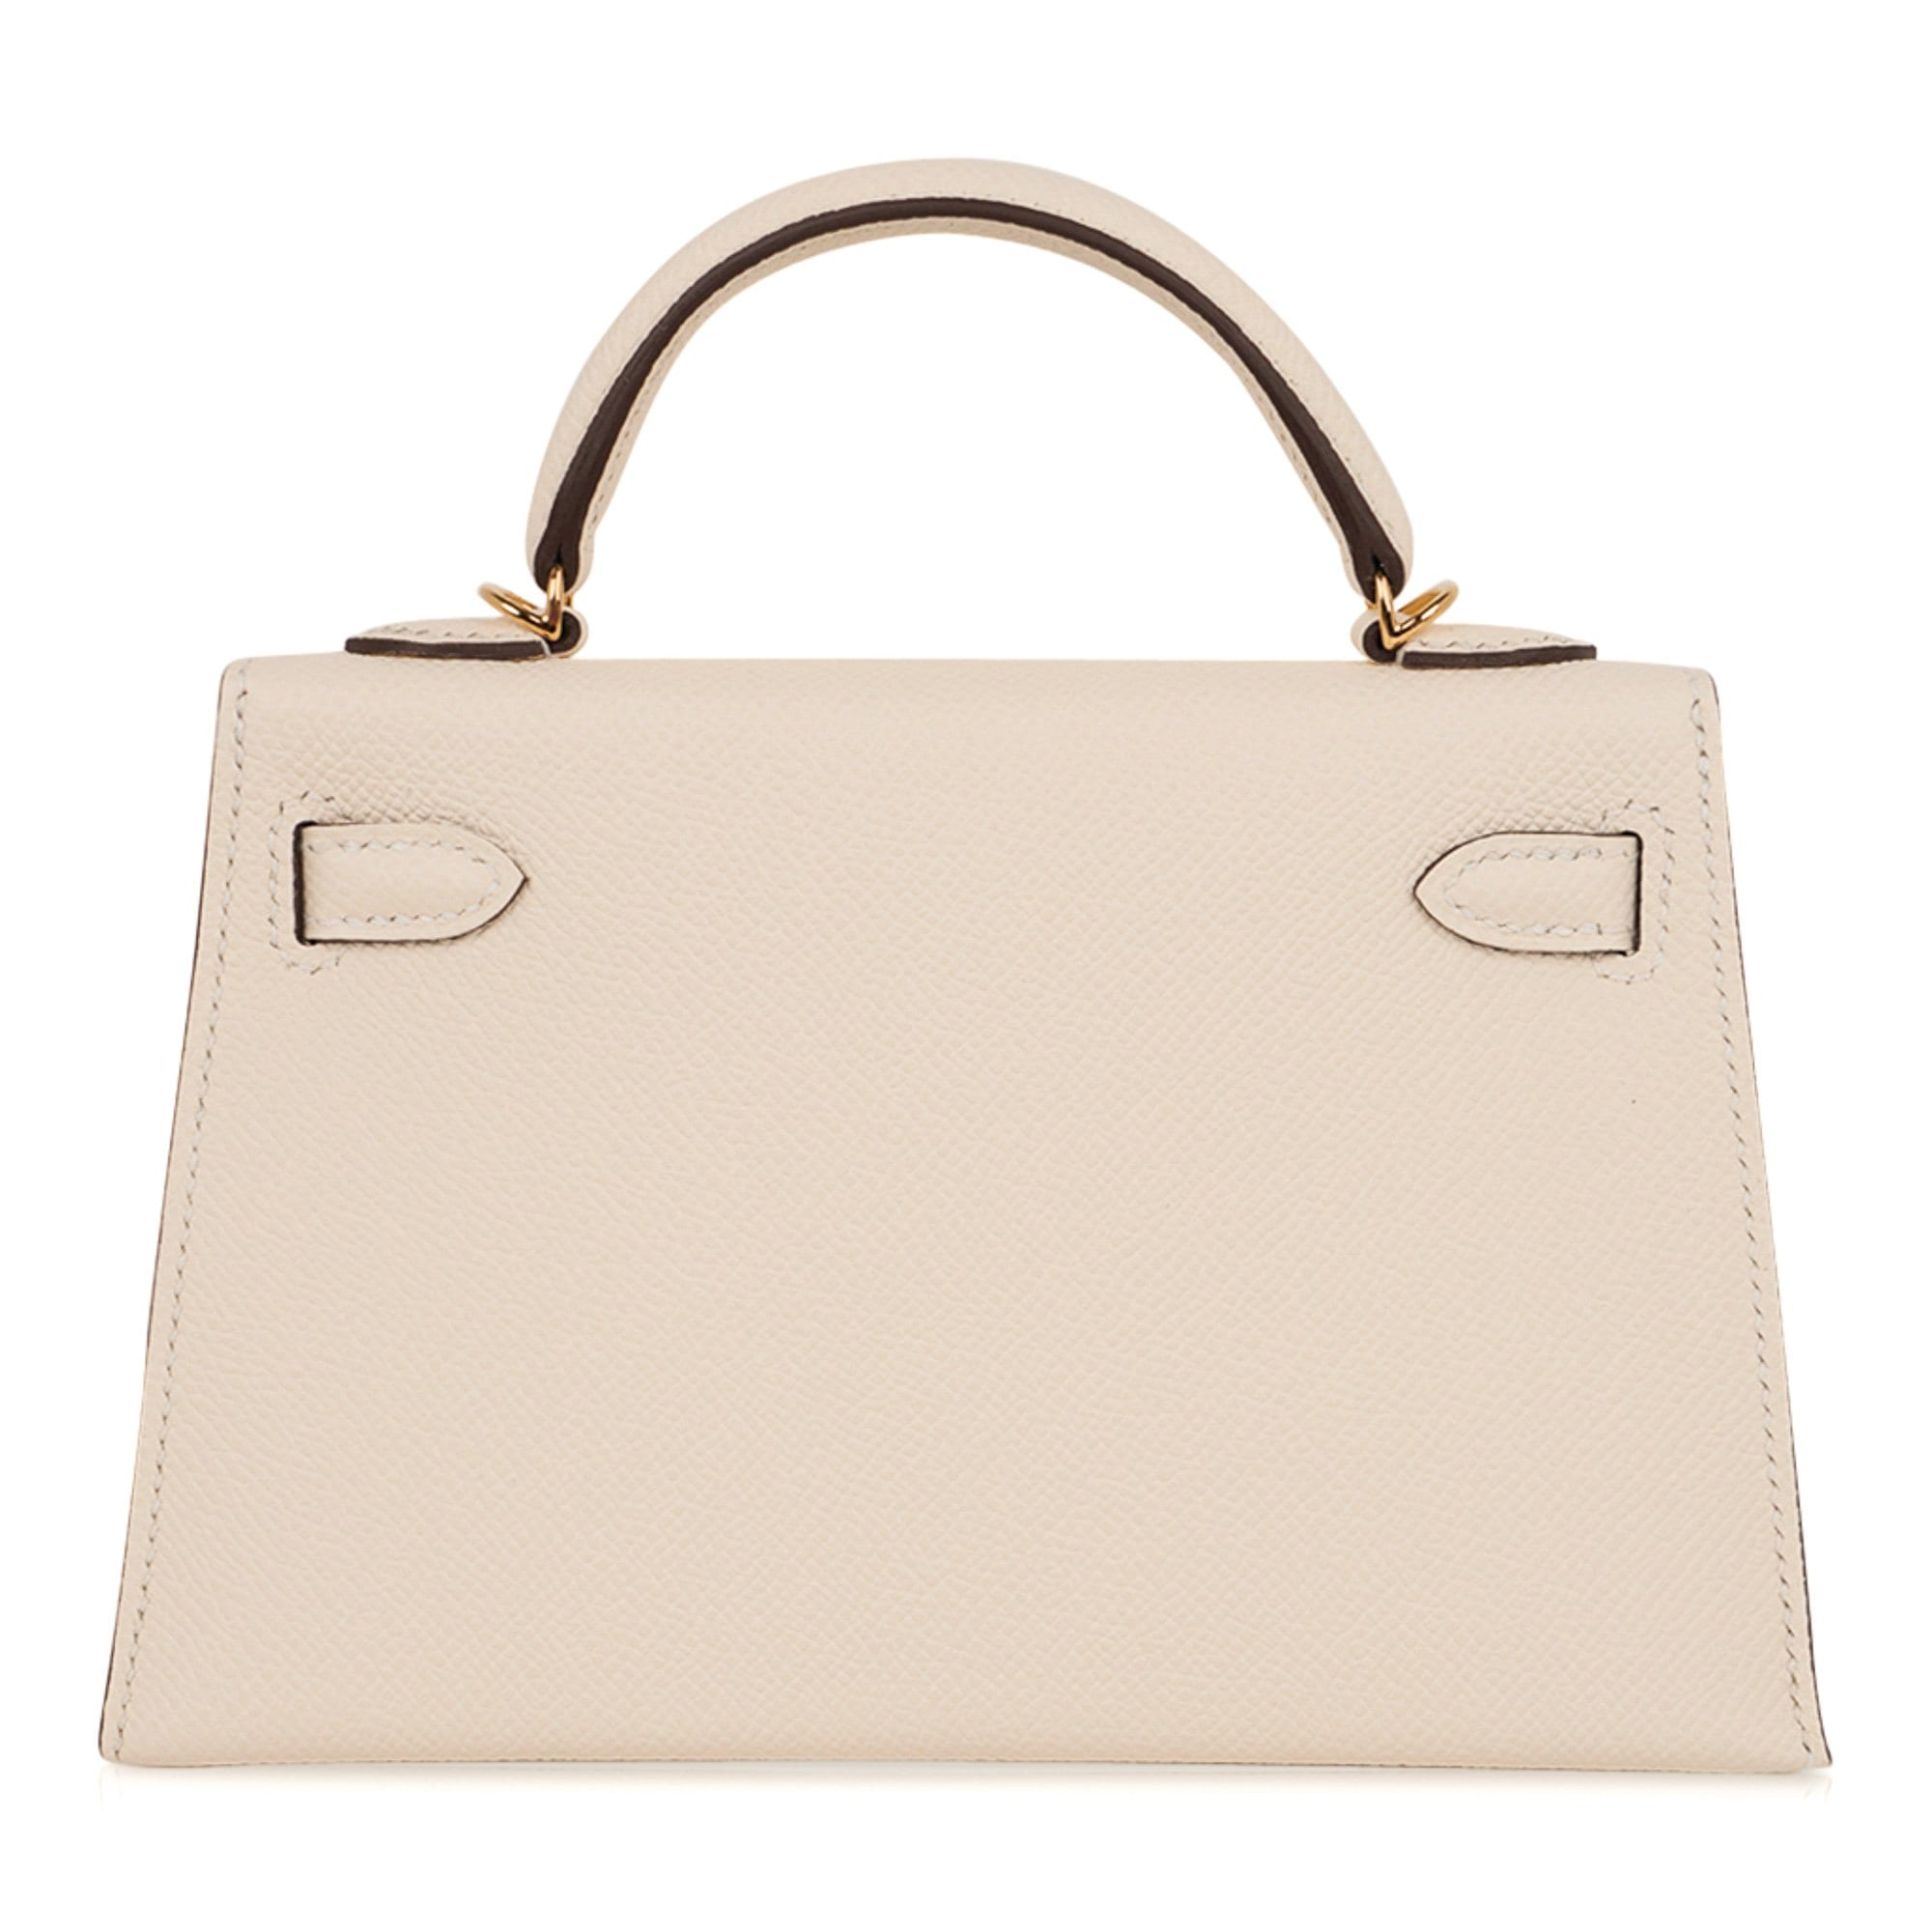 Hermes Personal Kelly bag mini Sellier Trench/ Nata Epsom leather